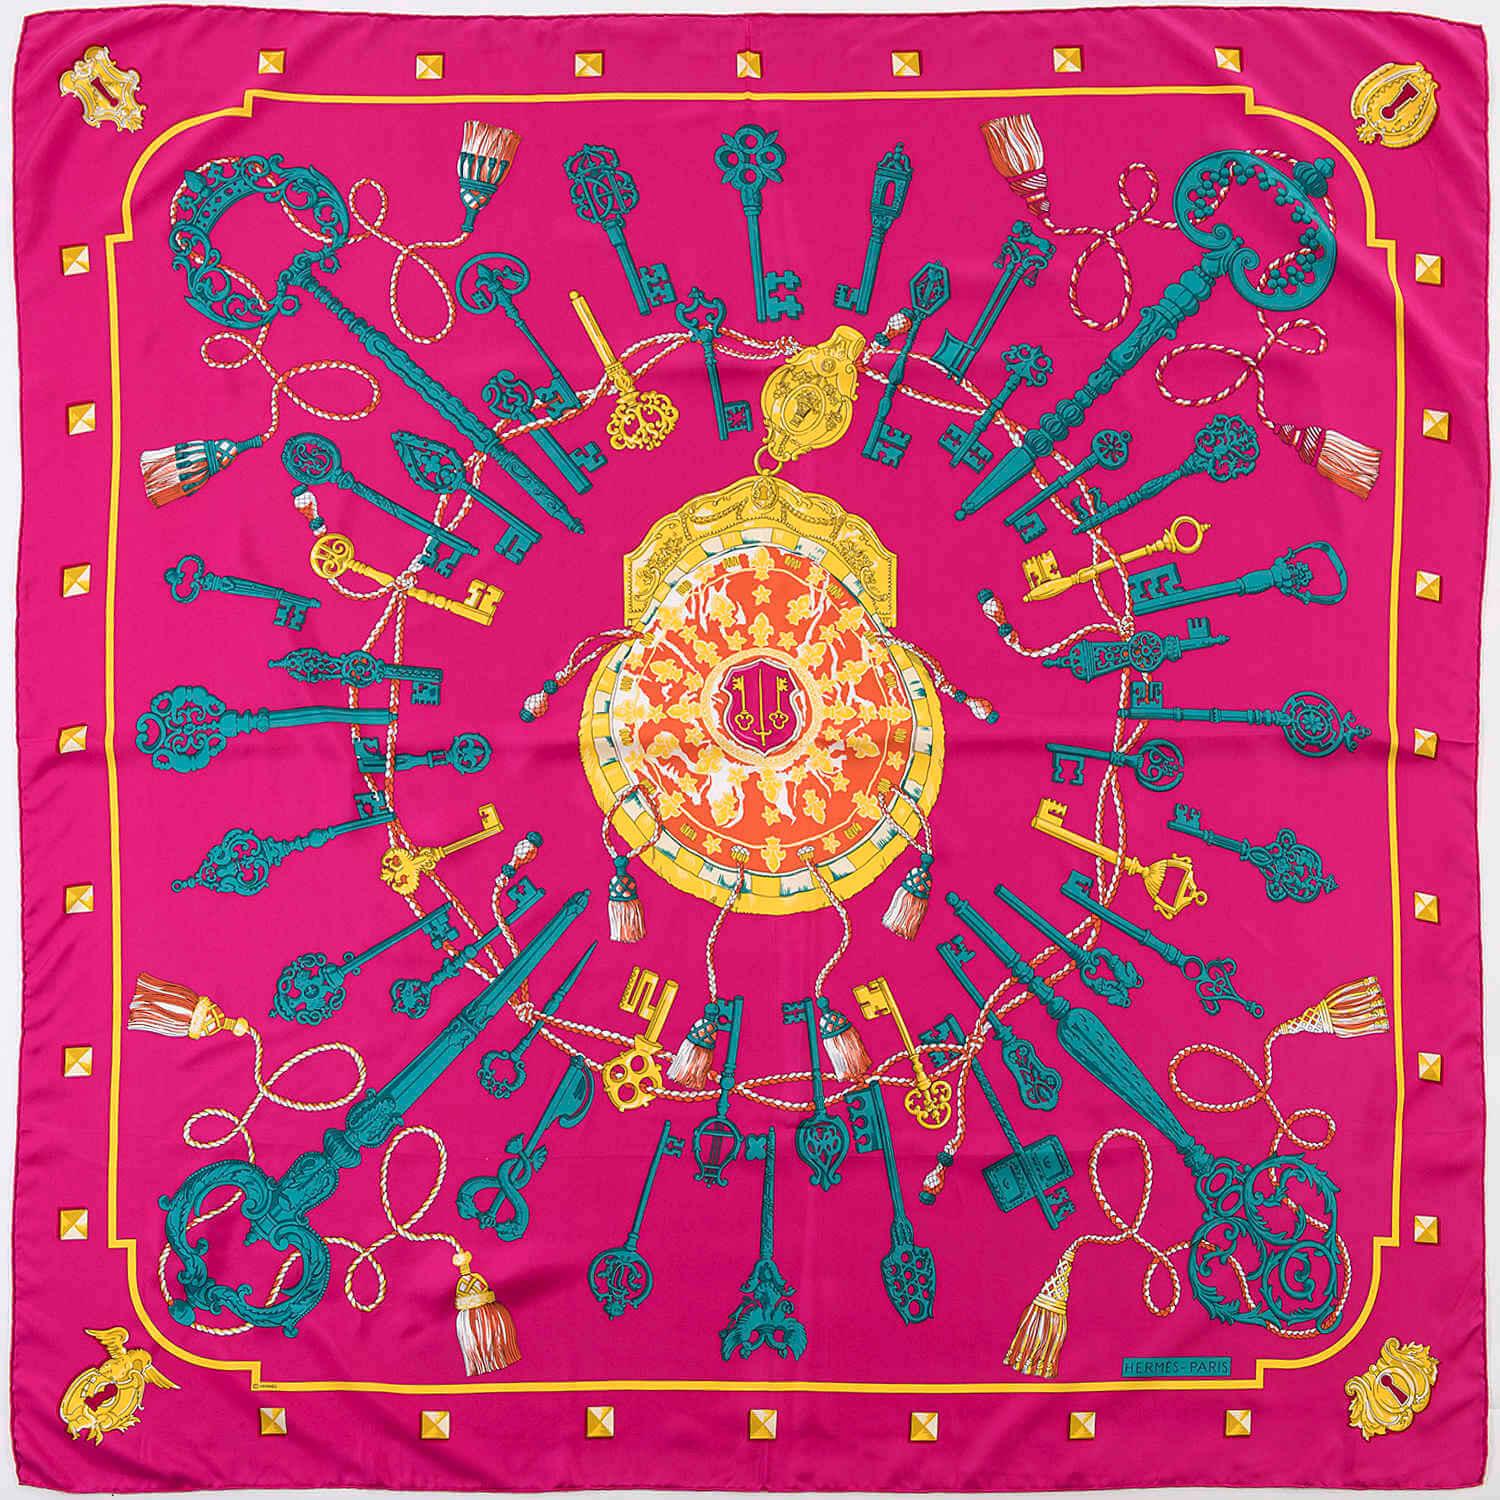 Red Stunning Hermes 140cm Silk Shawl 'Les Clefs' by Caty Latham